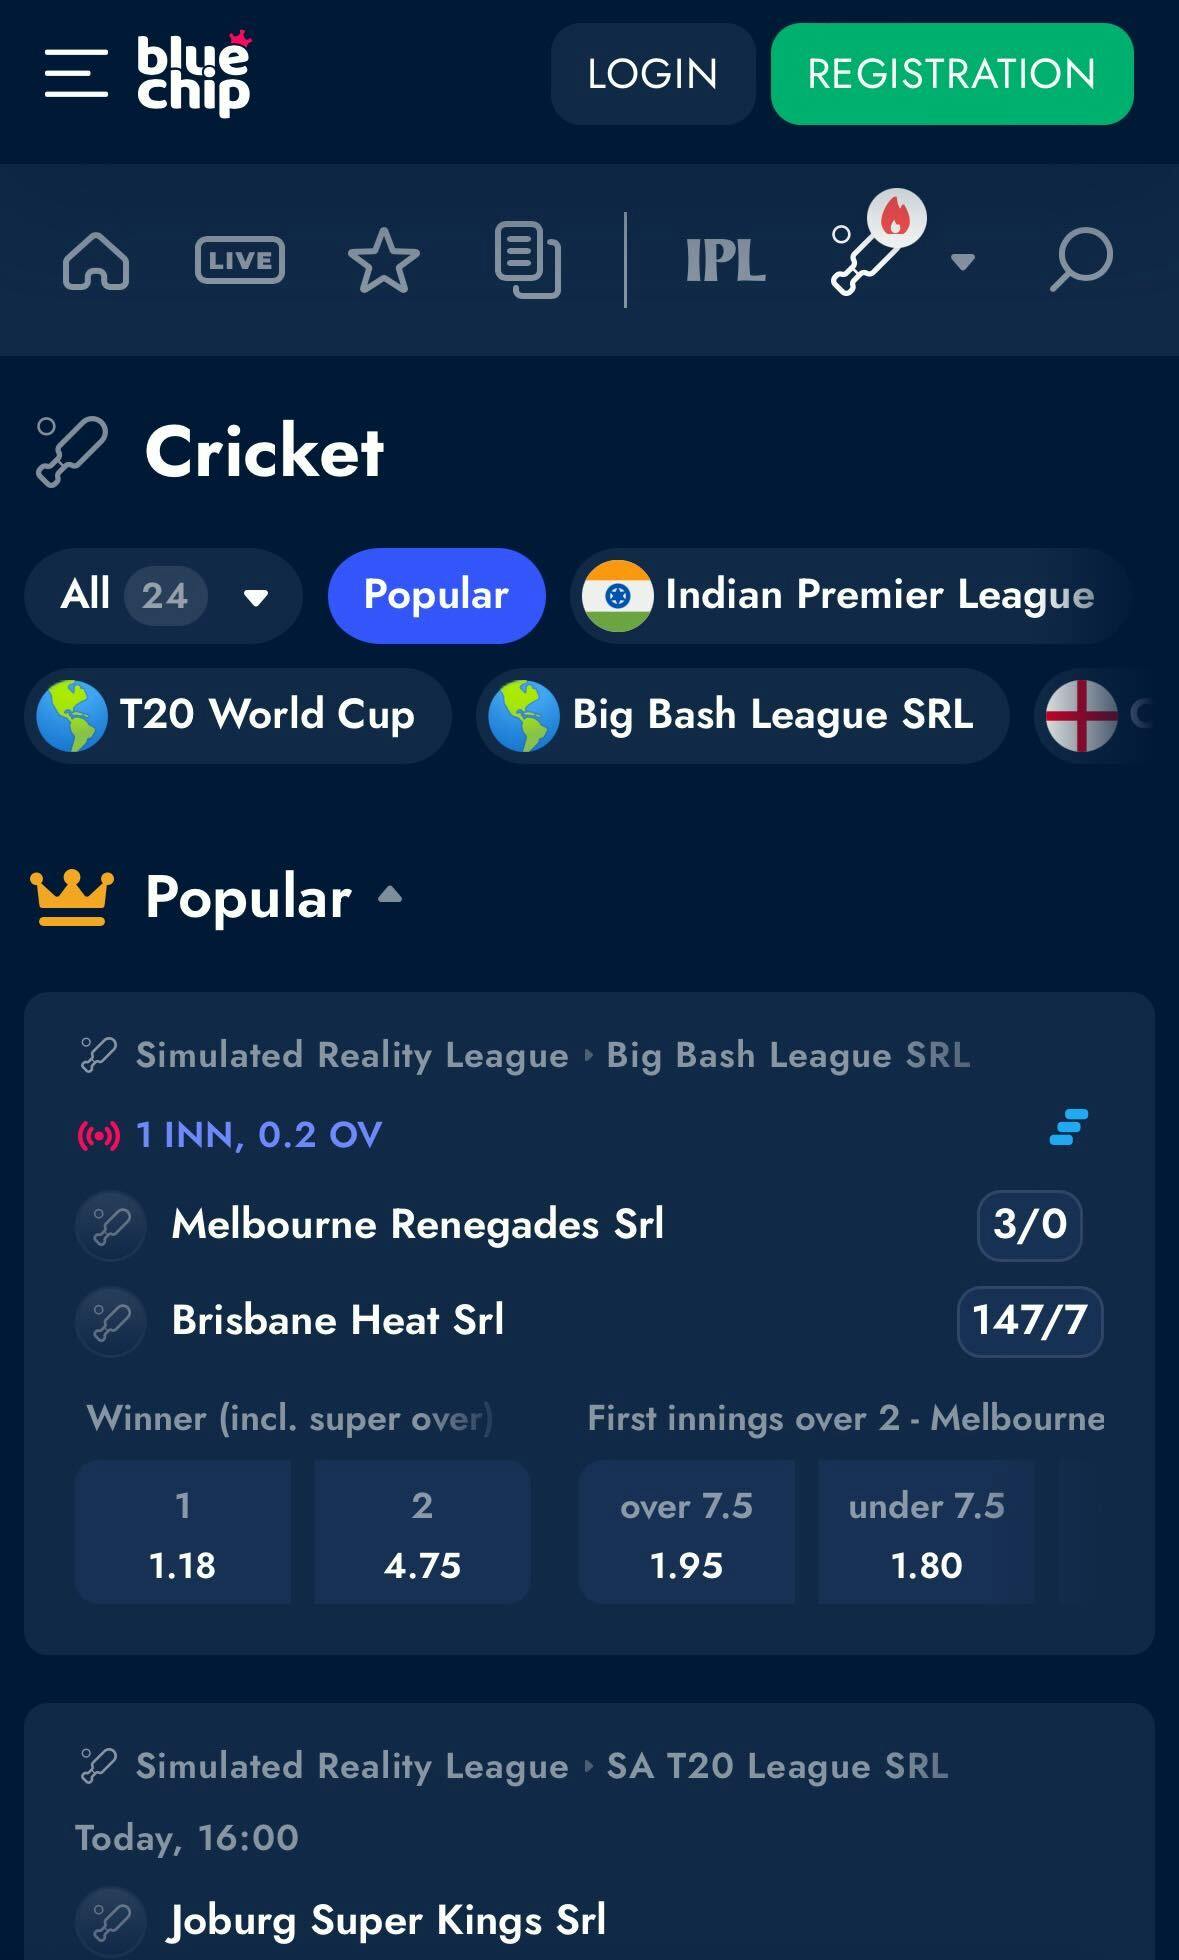 BlueChip cricket pre-match betting options in India